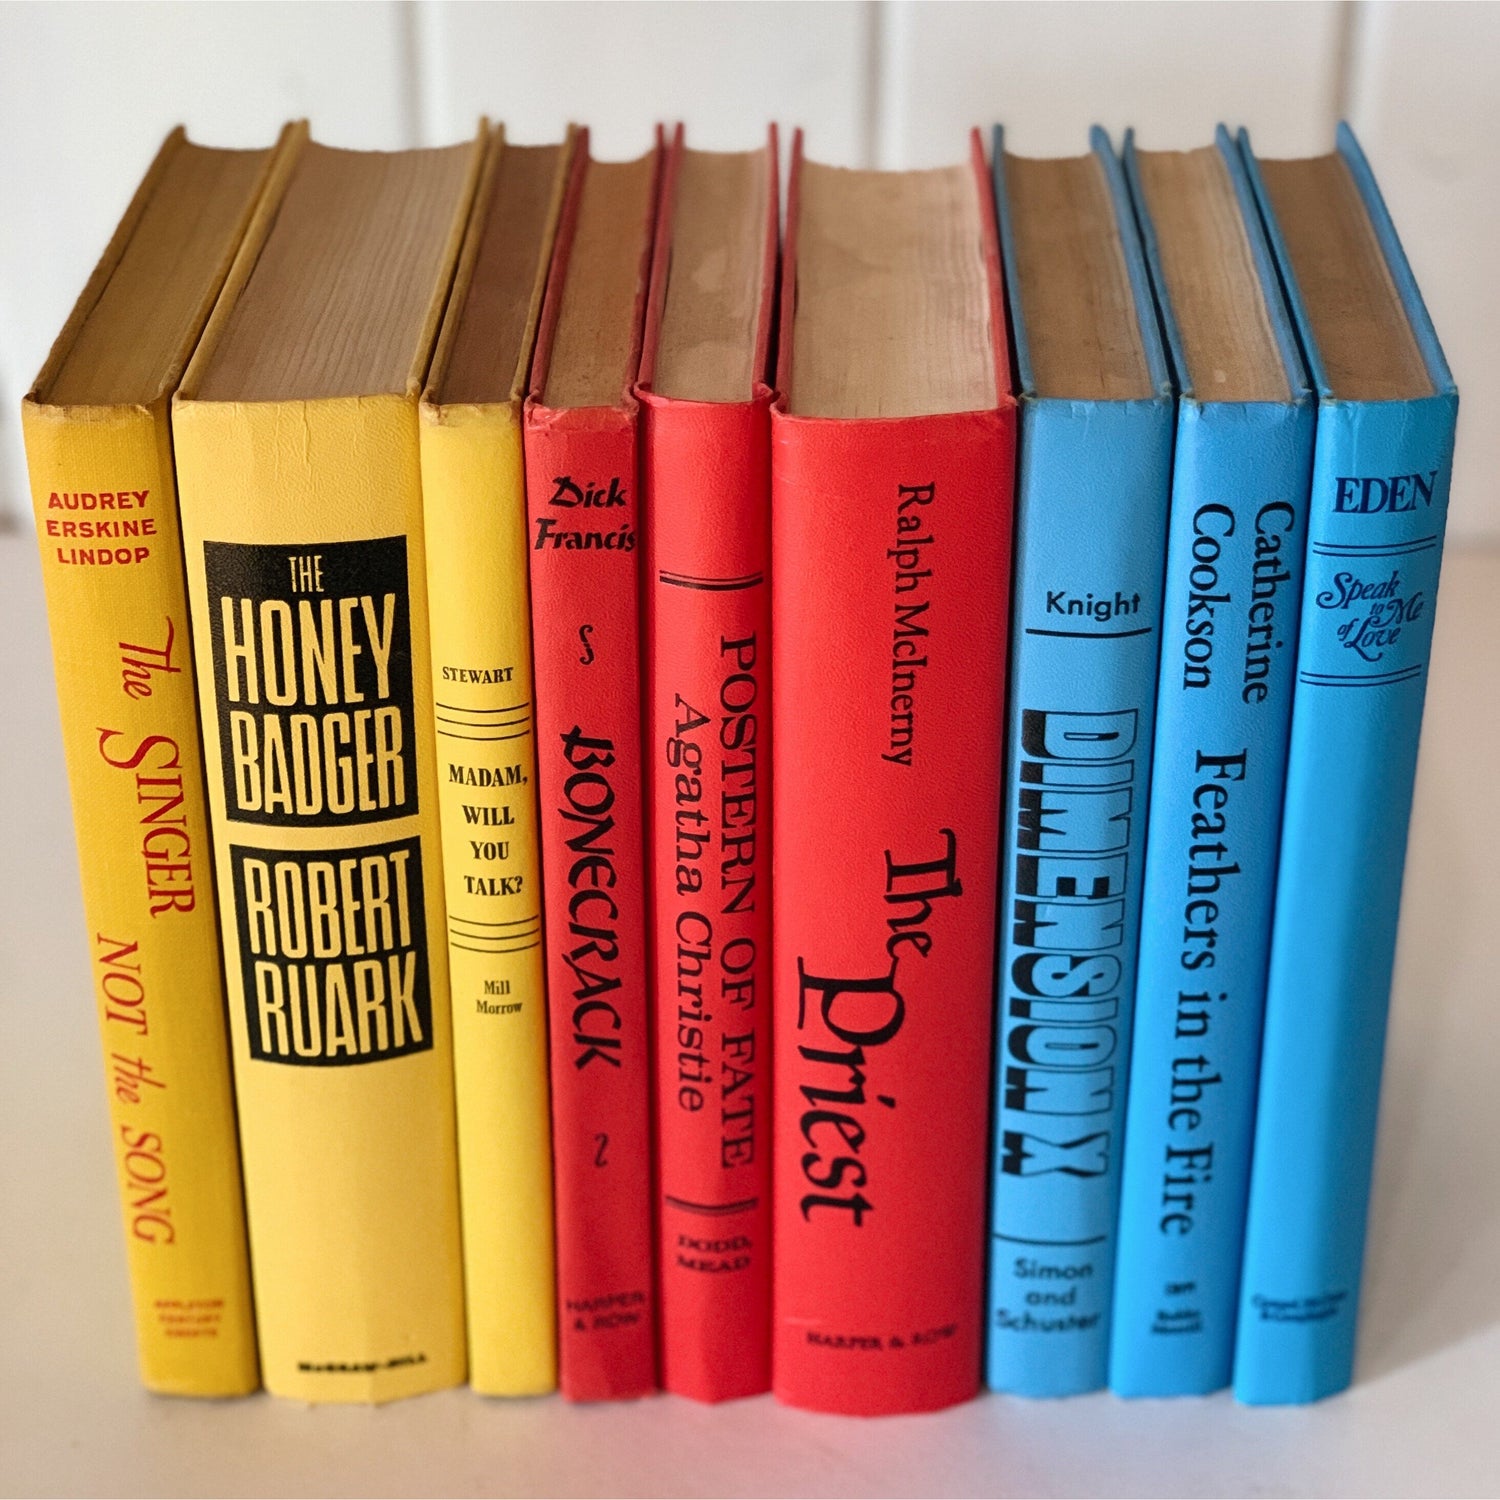 Retro Rainbow Books for Decor, Blue Red Yellow Book Bundle for Shelf Styling